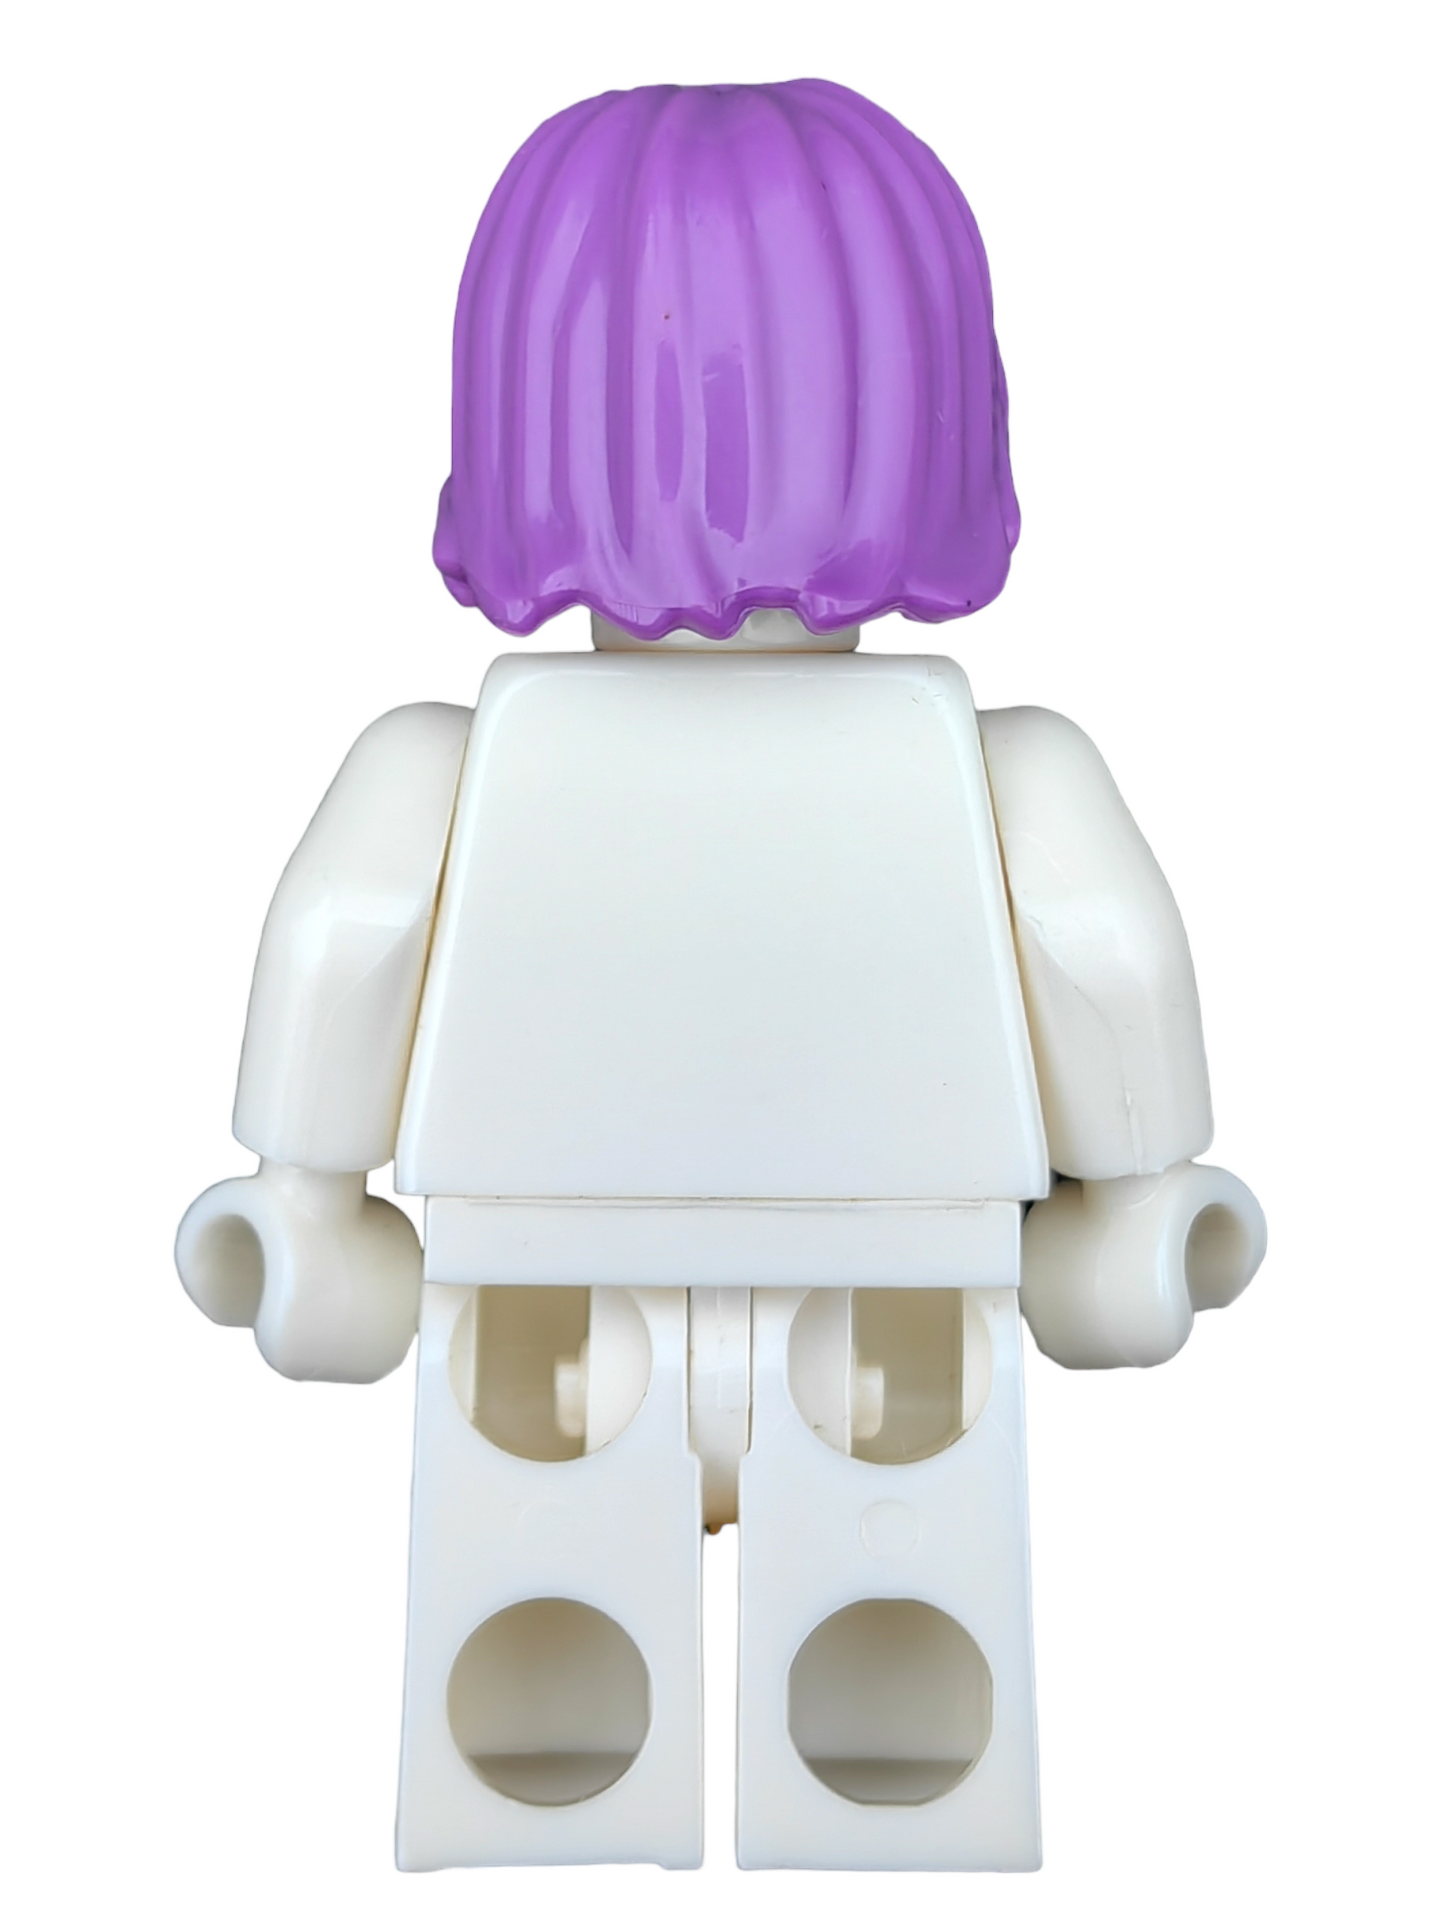 LEGO Wig, Purple Hair Medium Length with Middle Parting - UB1256